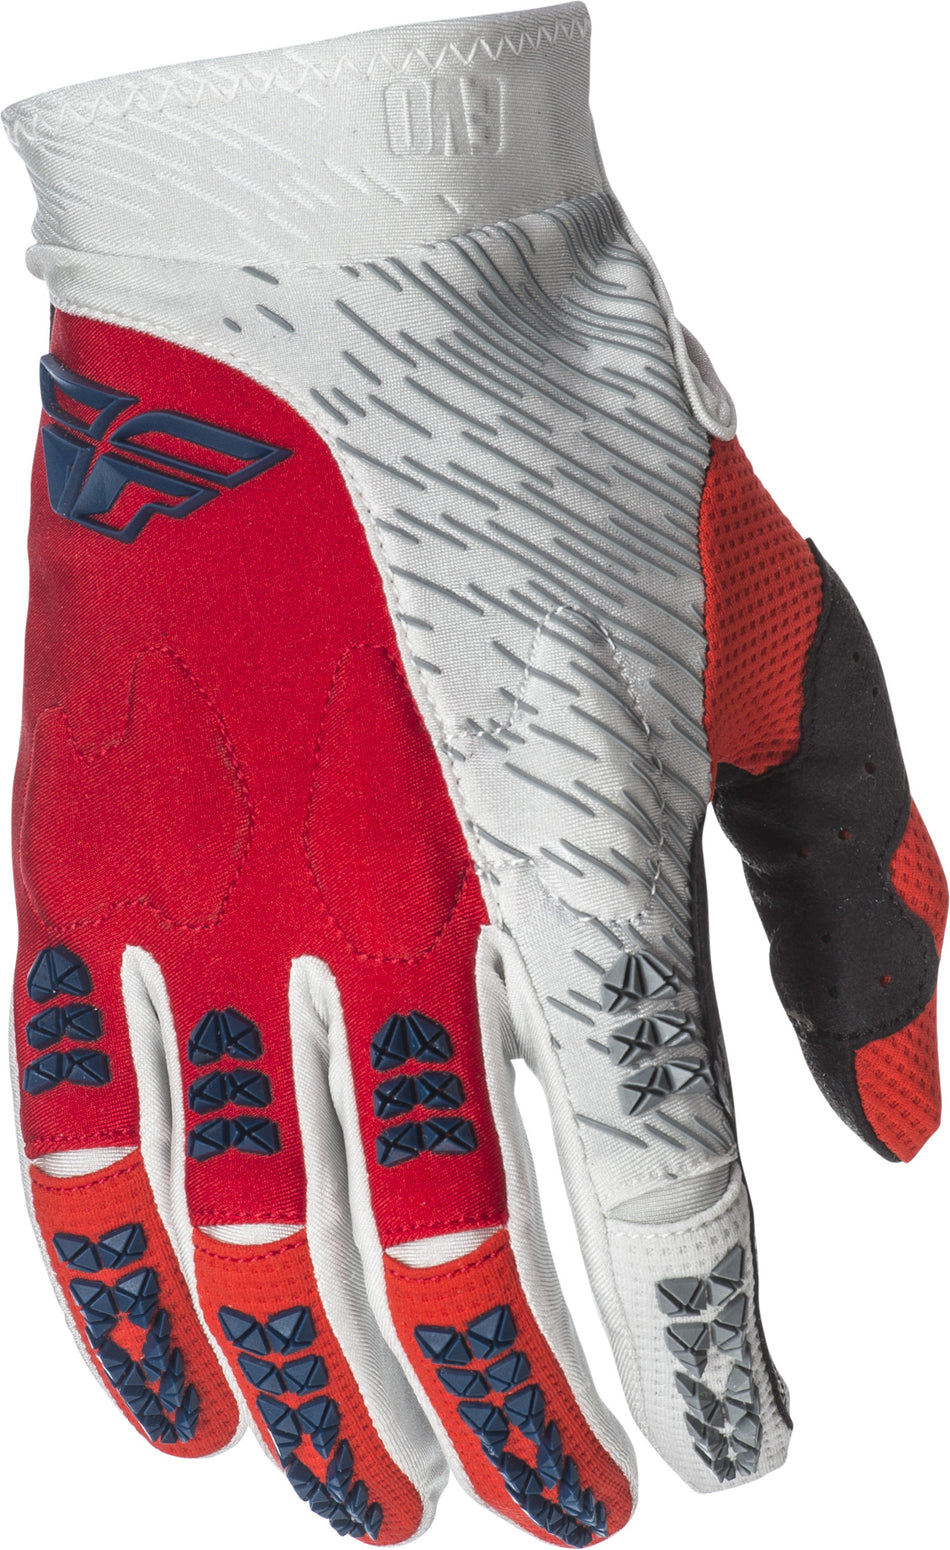 FLY RACING Evolution 2.0 Gloves Red/Grey/White Sz 10 371-11210